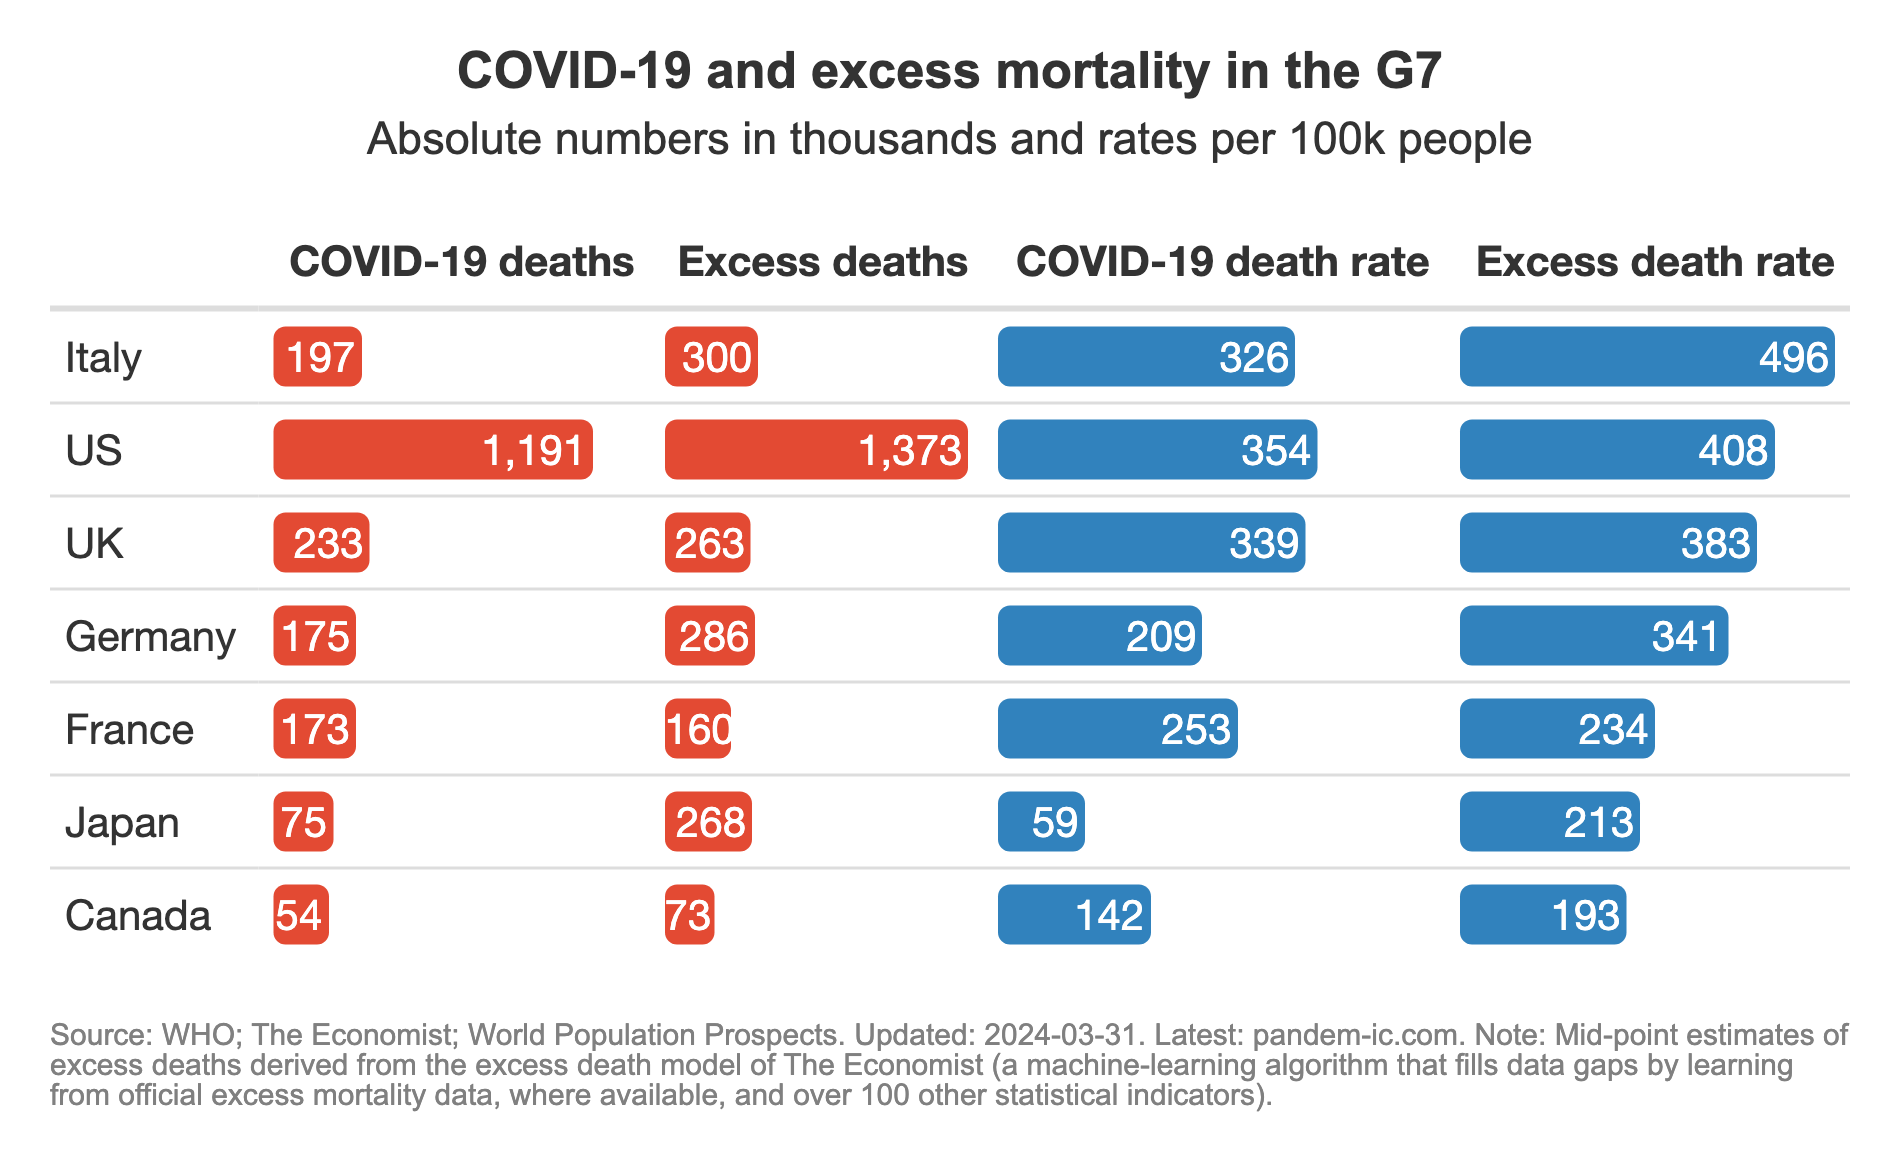 G7 mortality: overview of the latest data